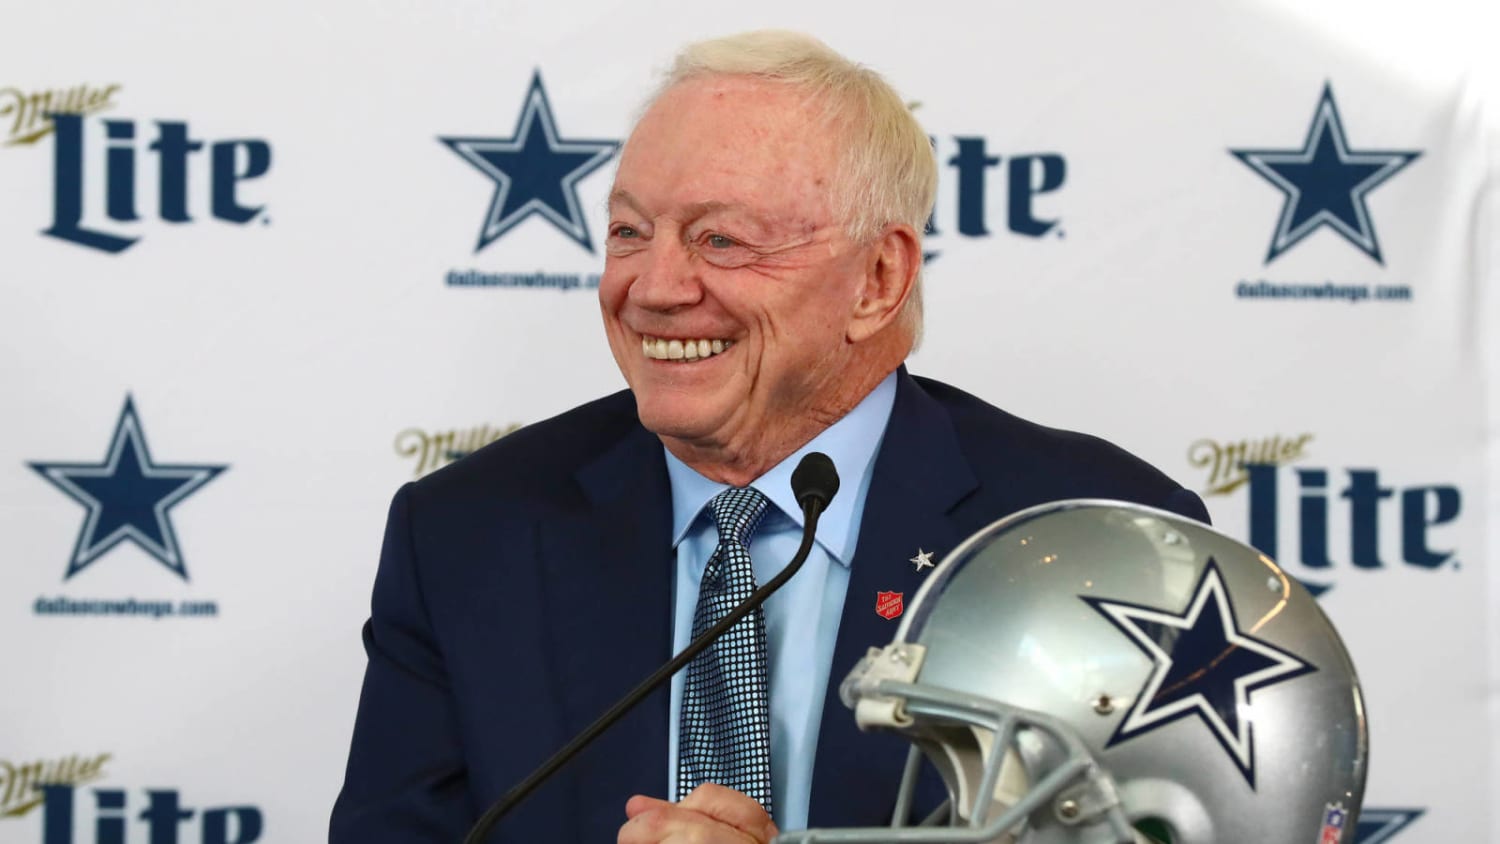 Cowboys remain world's most valuable sports franchise at $5.7 billion